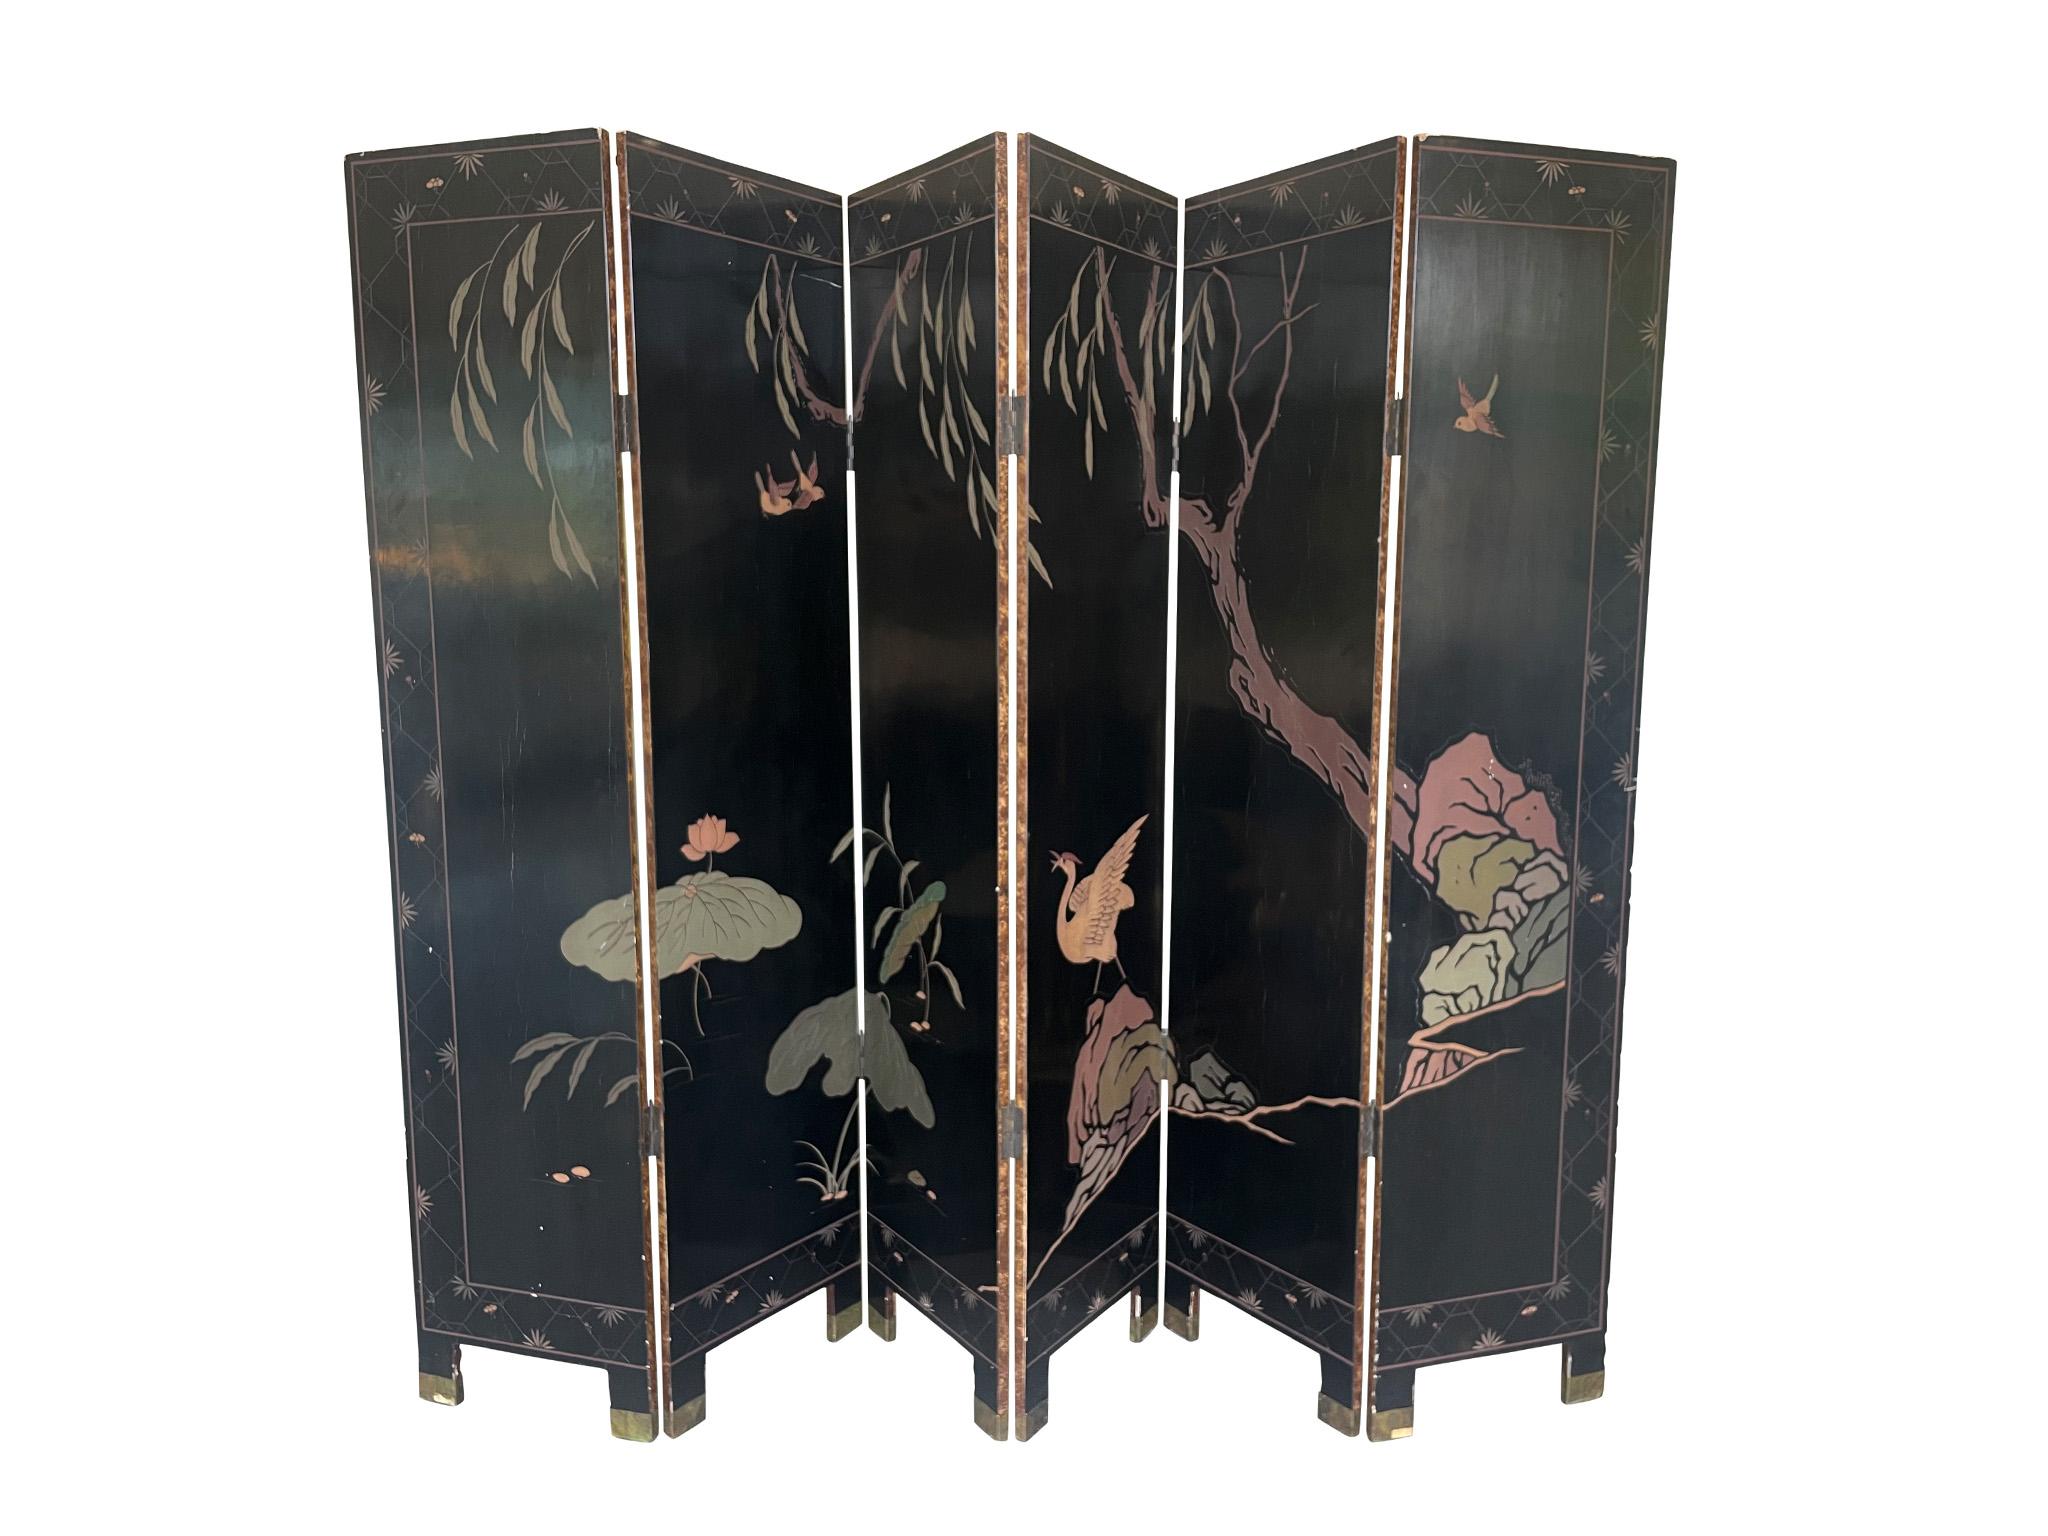 This richly designed Chinese folding screen consists of 6 individual panels. It was made in the 2nd quarter of the 20th Century. One side has a black lacquered ground that unfolds a dark, quiet landscape of birds and foliage. The other side unfolds